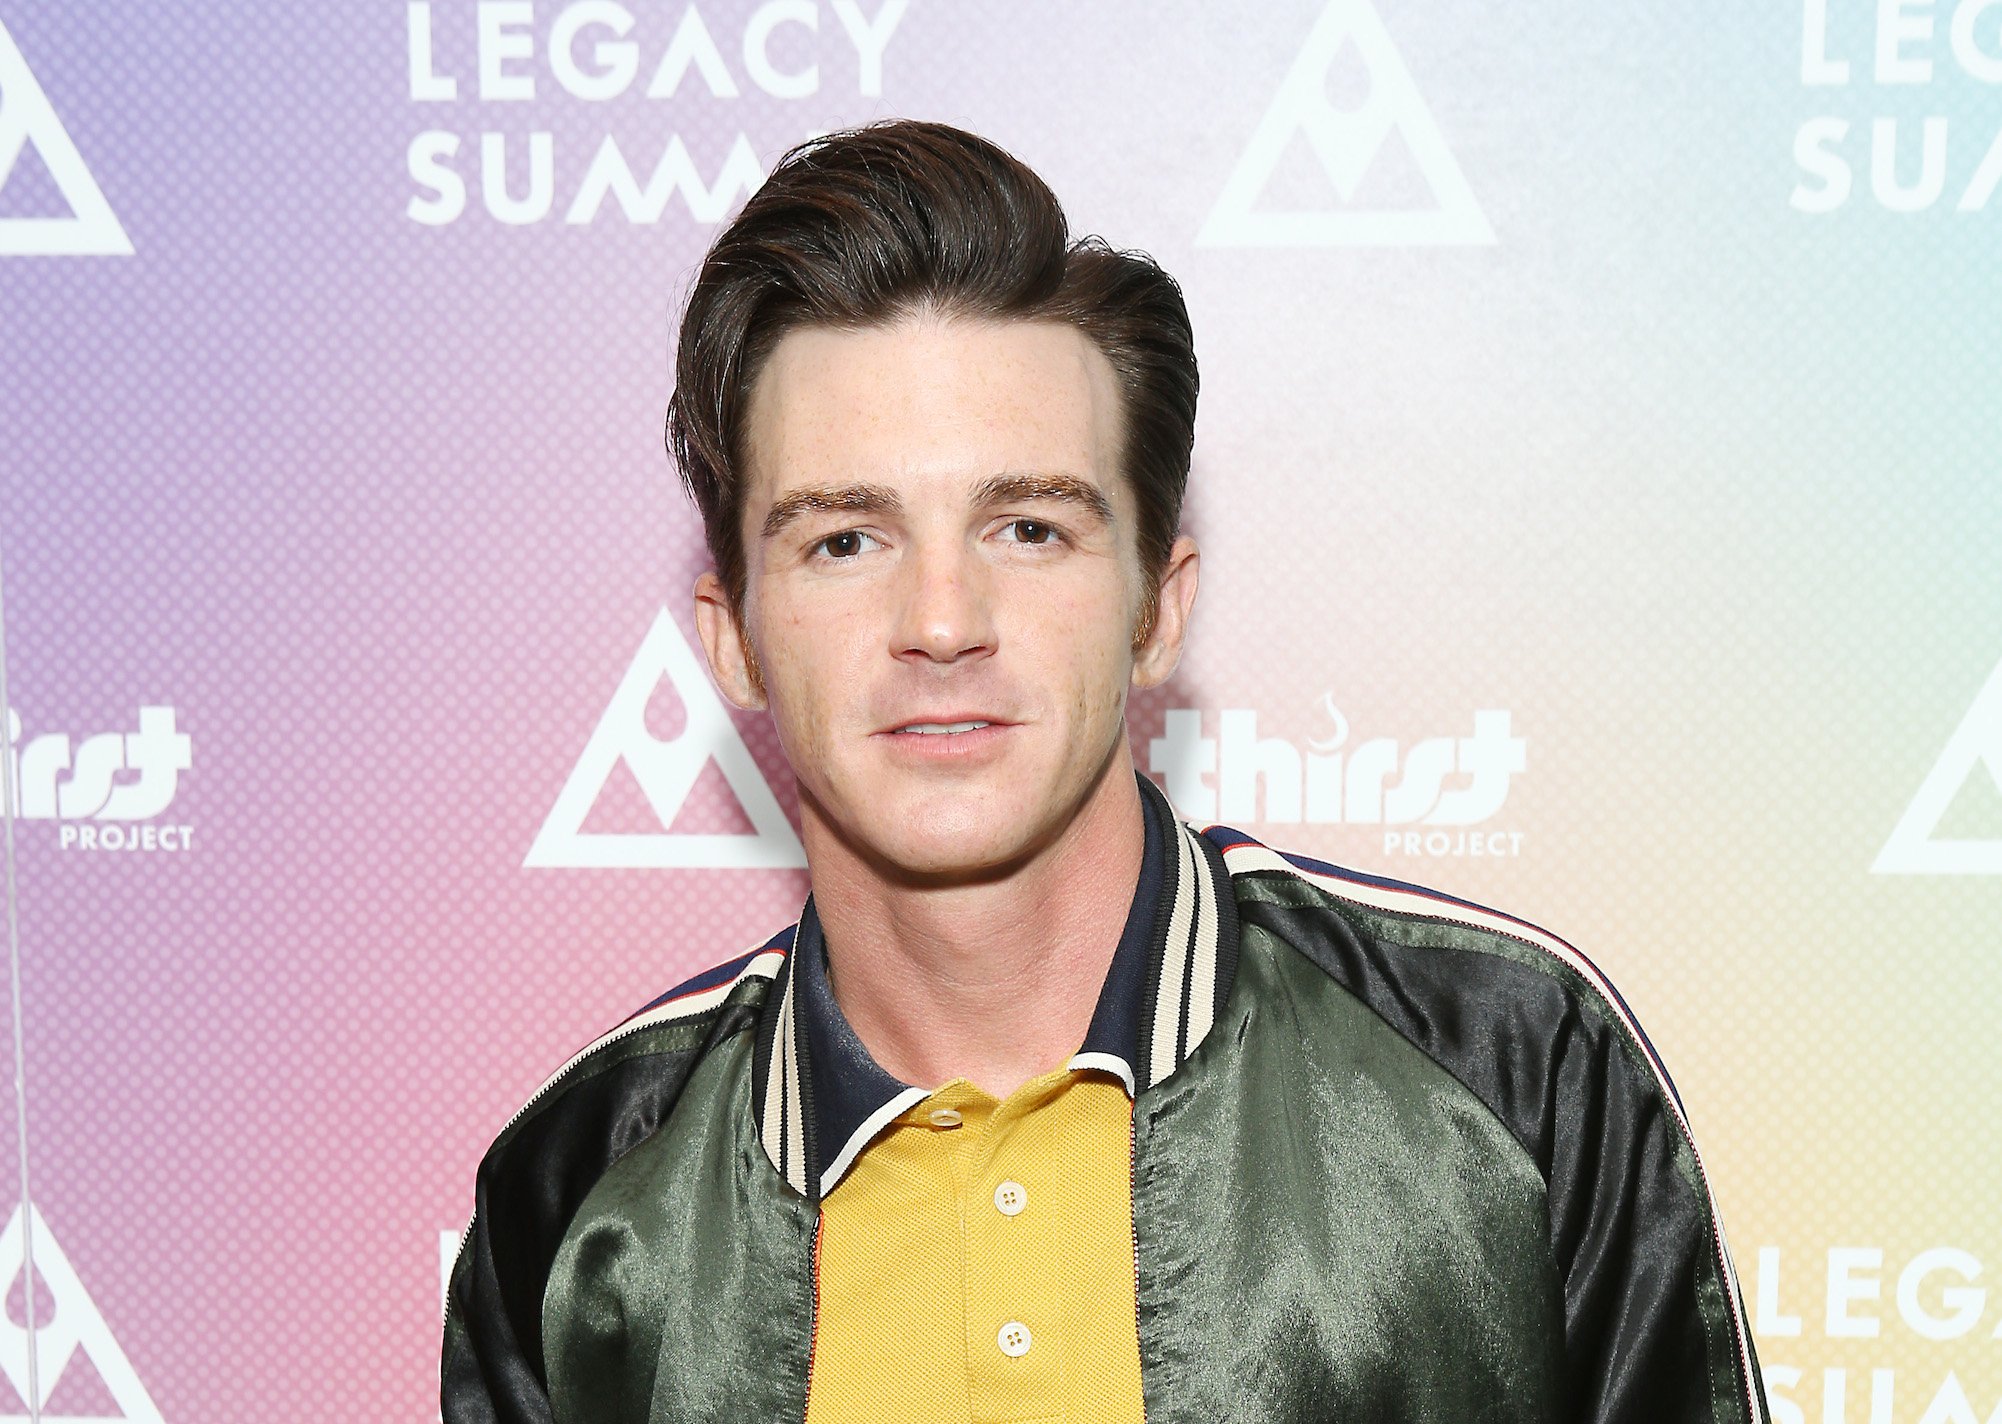 Drake Bell attends the Thirst Project's Inaugural Legacy Summit